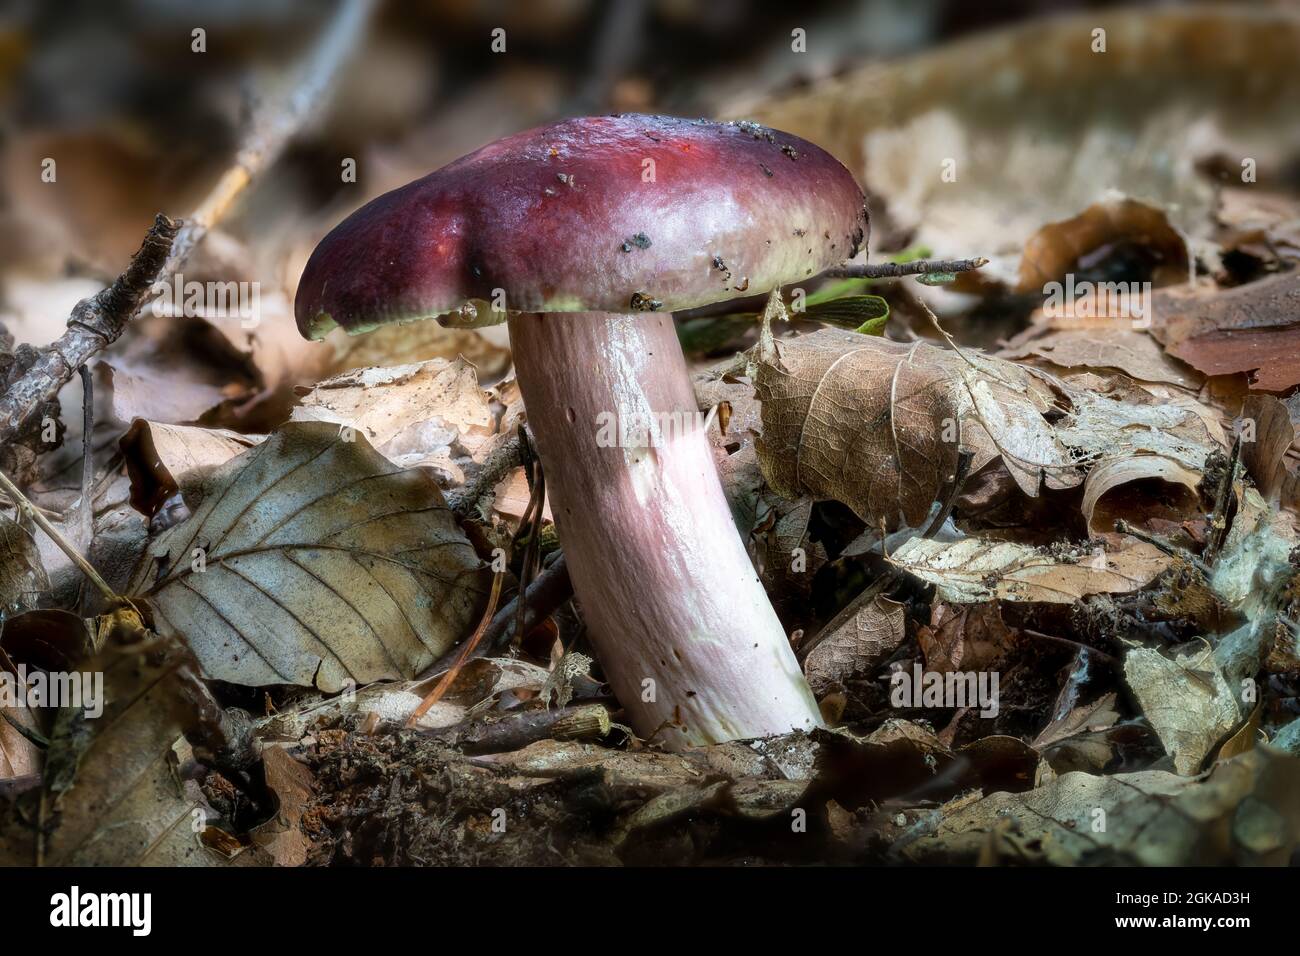 Close up of a primrose brittlegill Russula sardonia mushroom between moss and autumn leaves on the forest floor Stock Photo